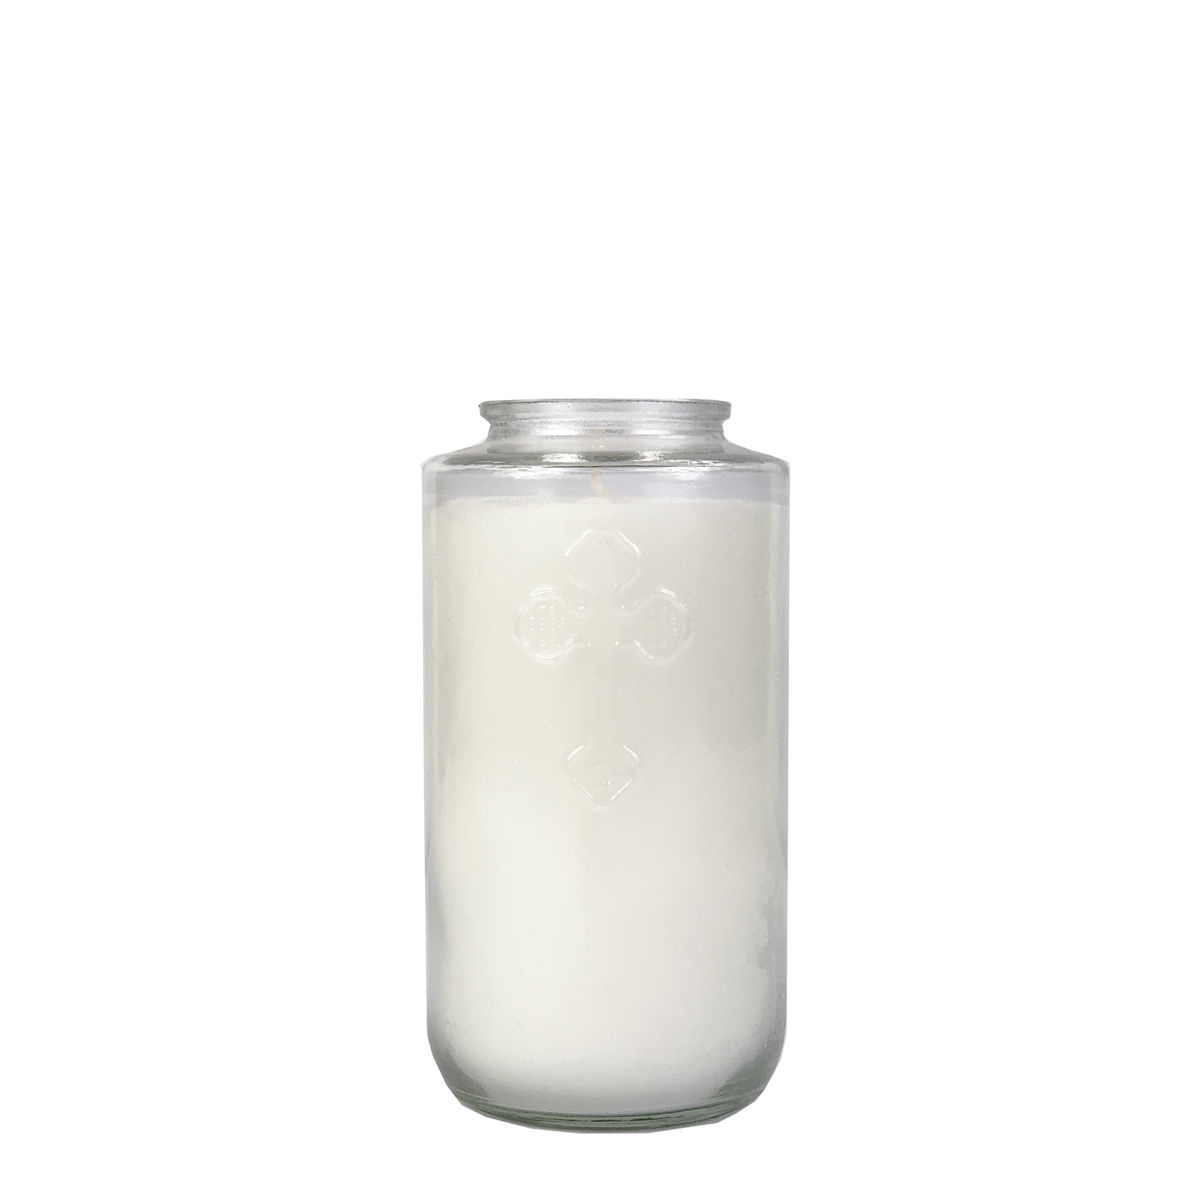 3 DAY OFFERING CONTAINER CANDLE